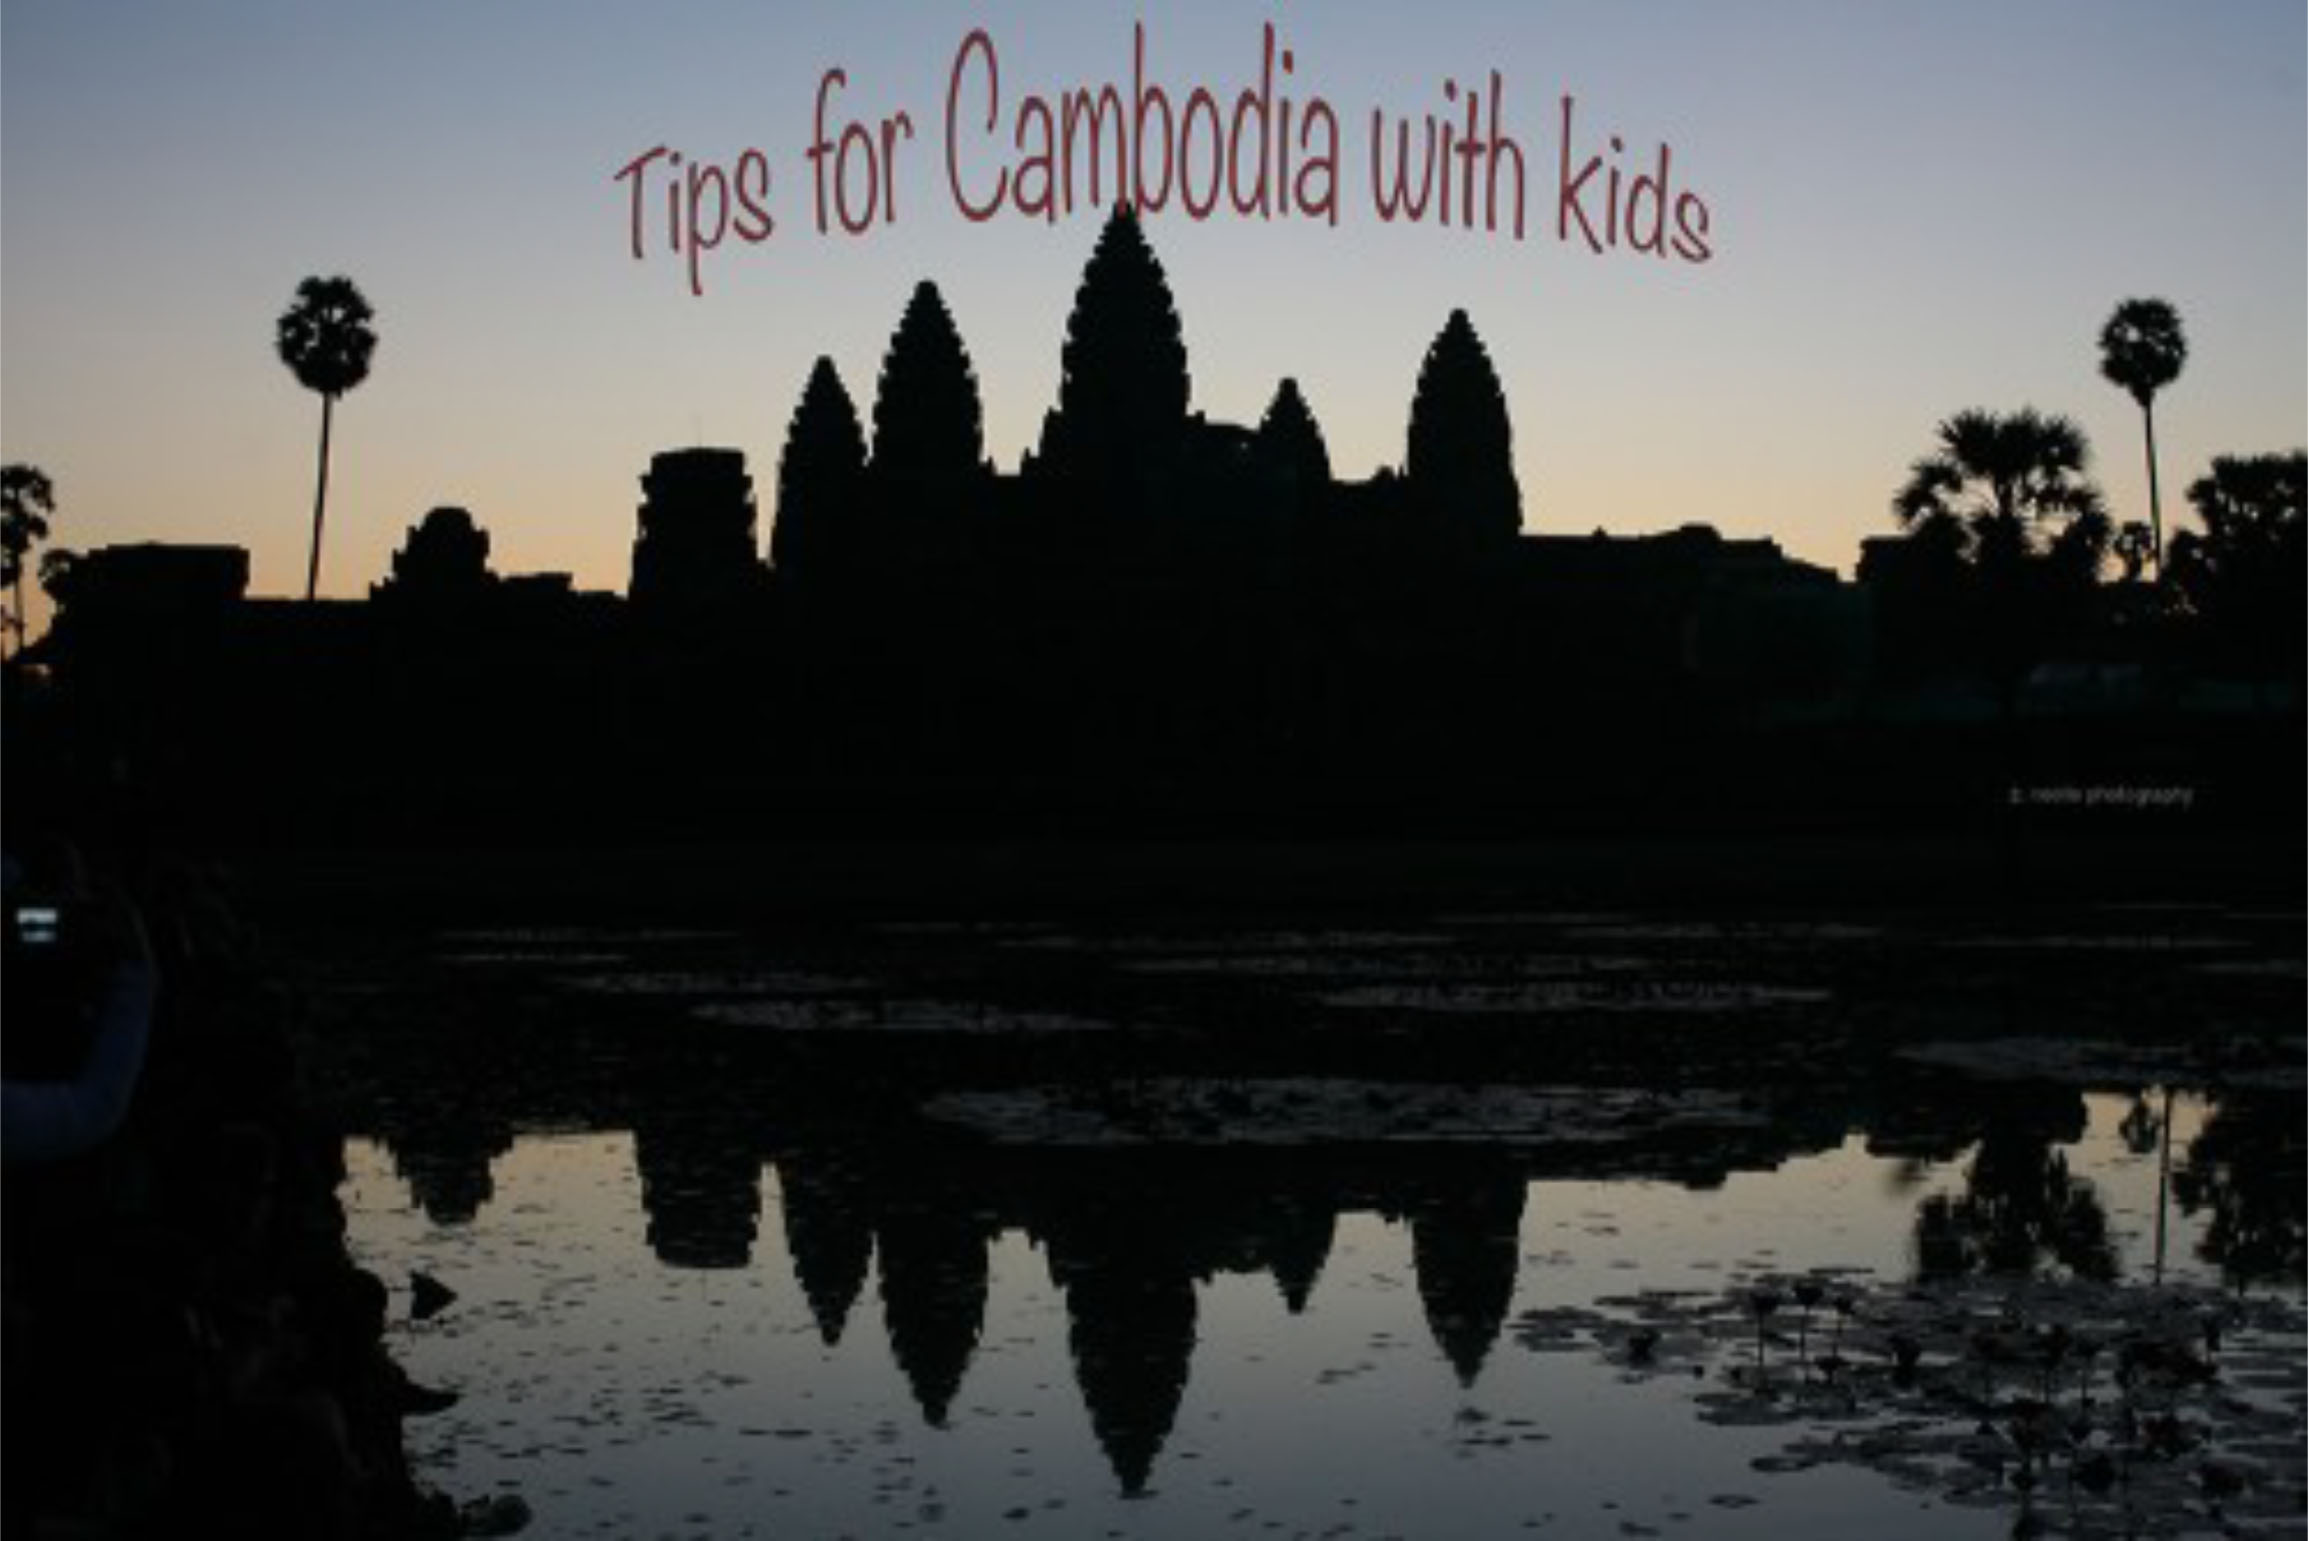 Tips for Visiting Cambodia with Kids